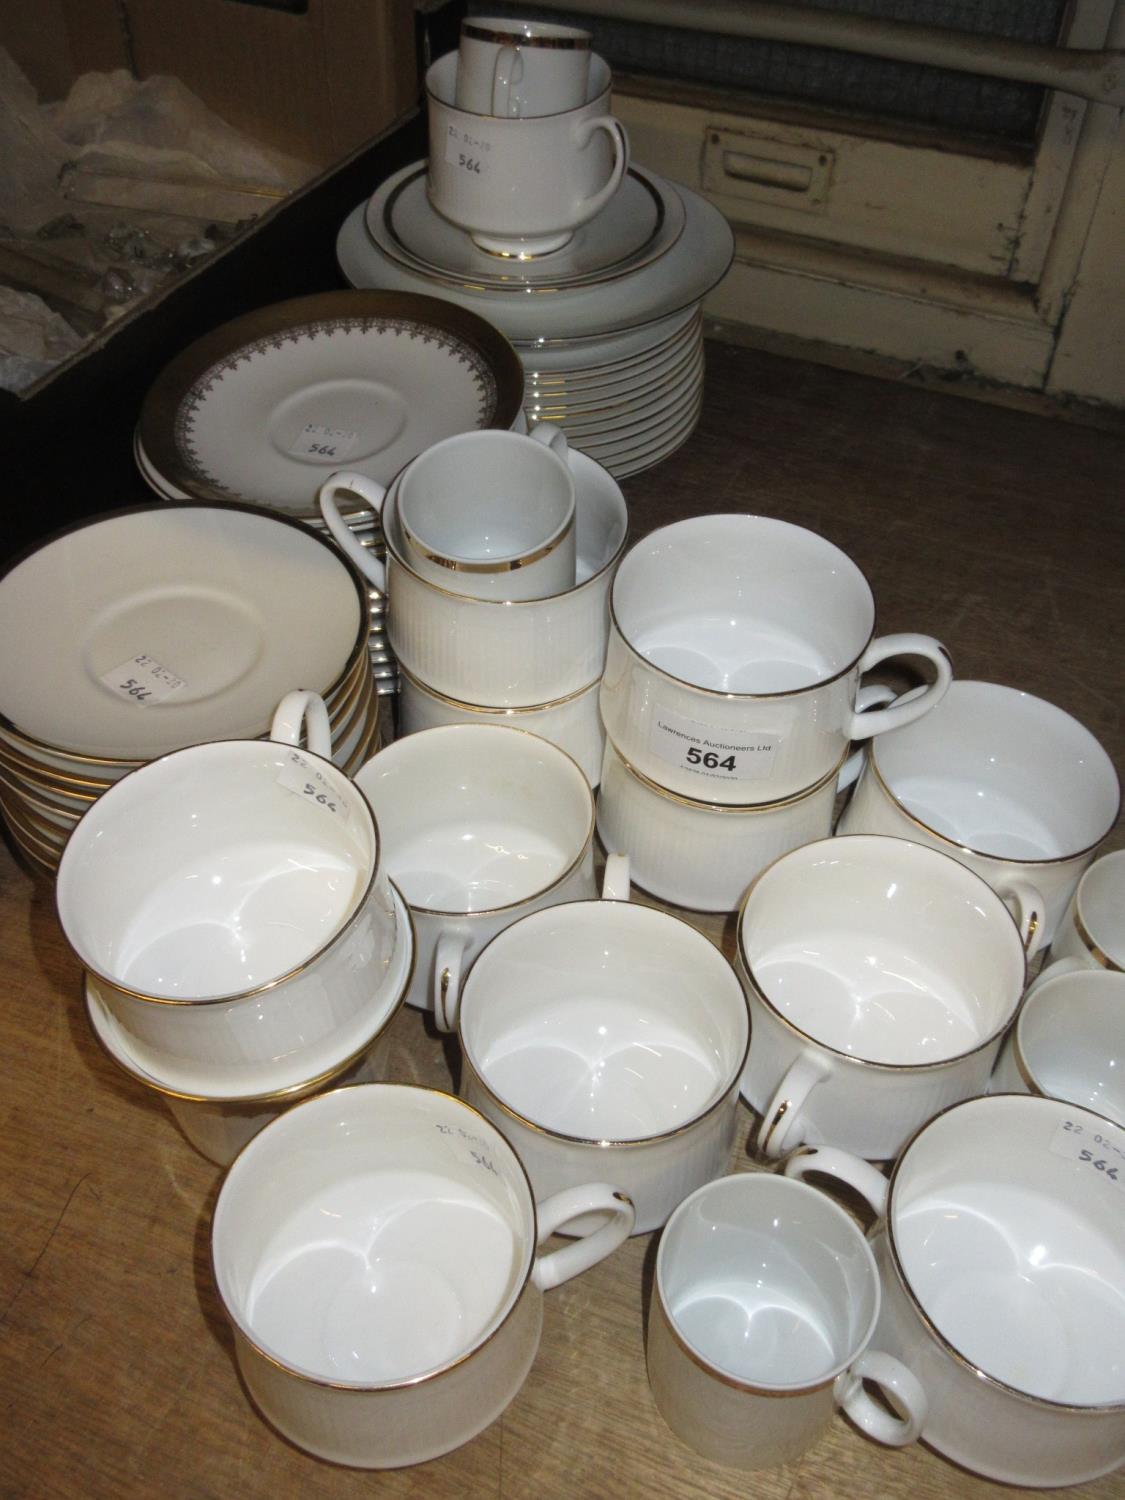 Thomas porcelain coffee service together with Royal Grafton part tea service and a Royal Standard - Image 2 of 2